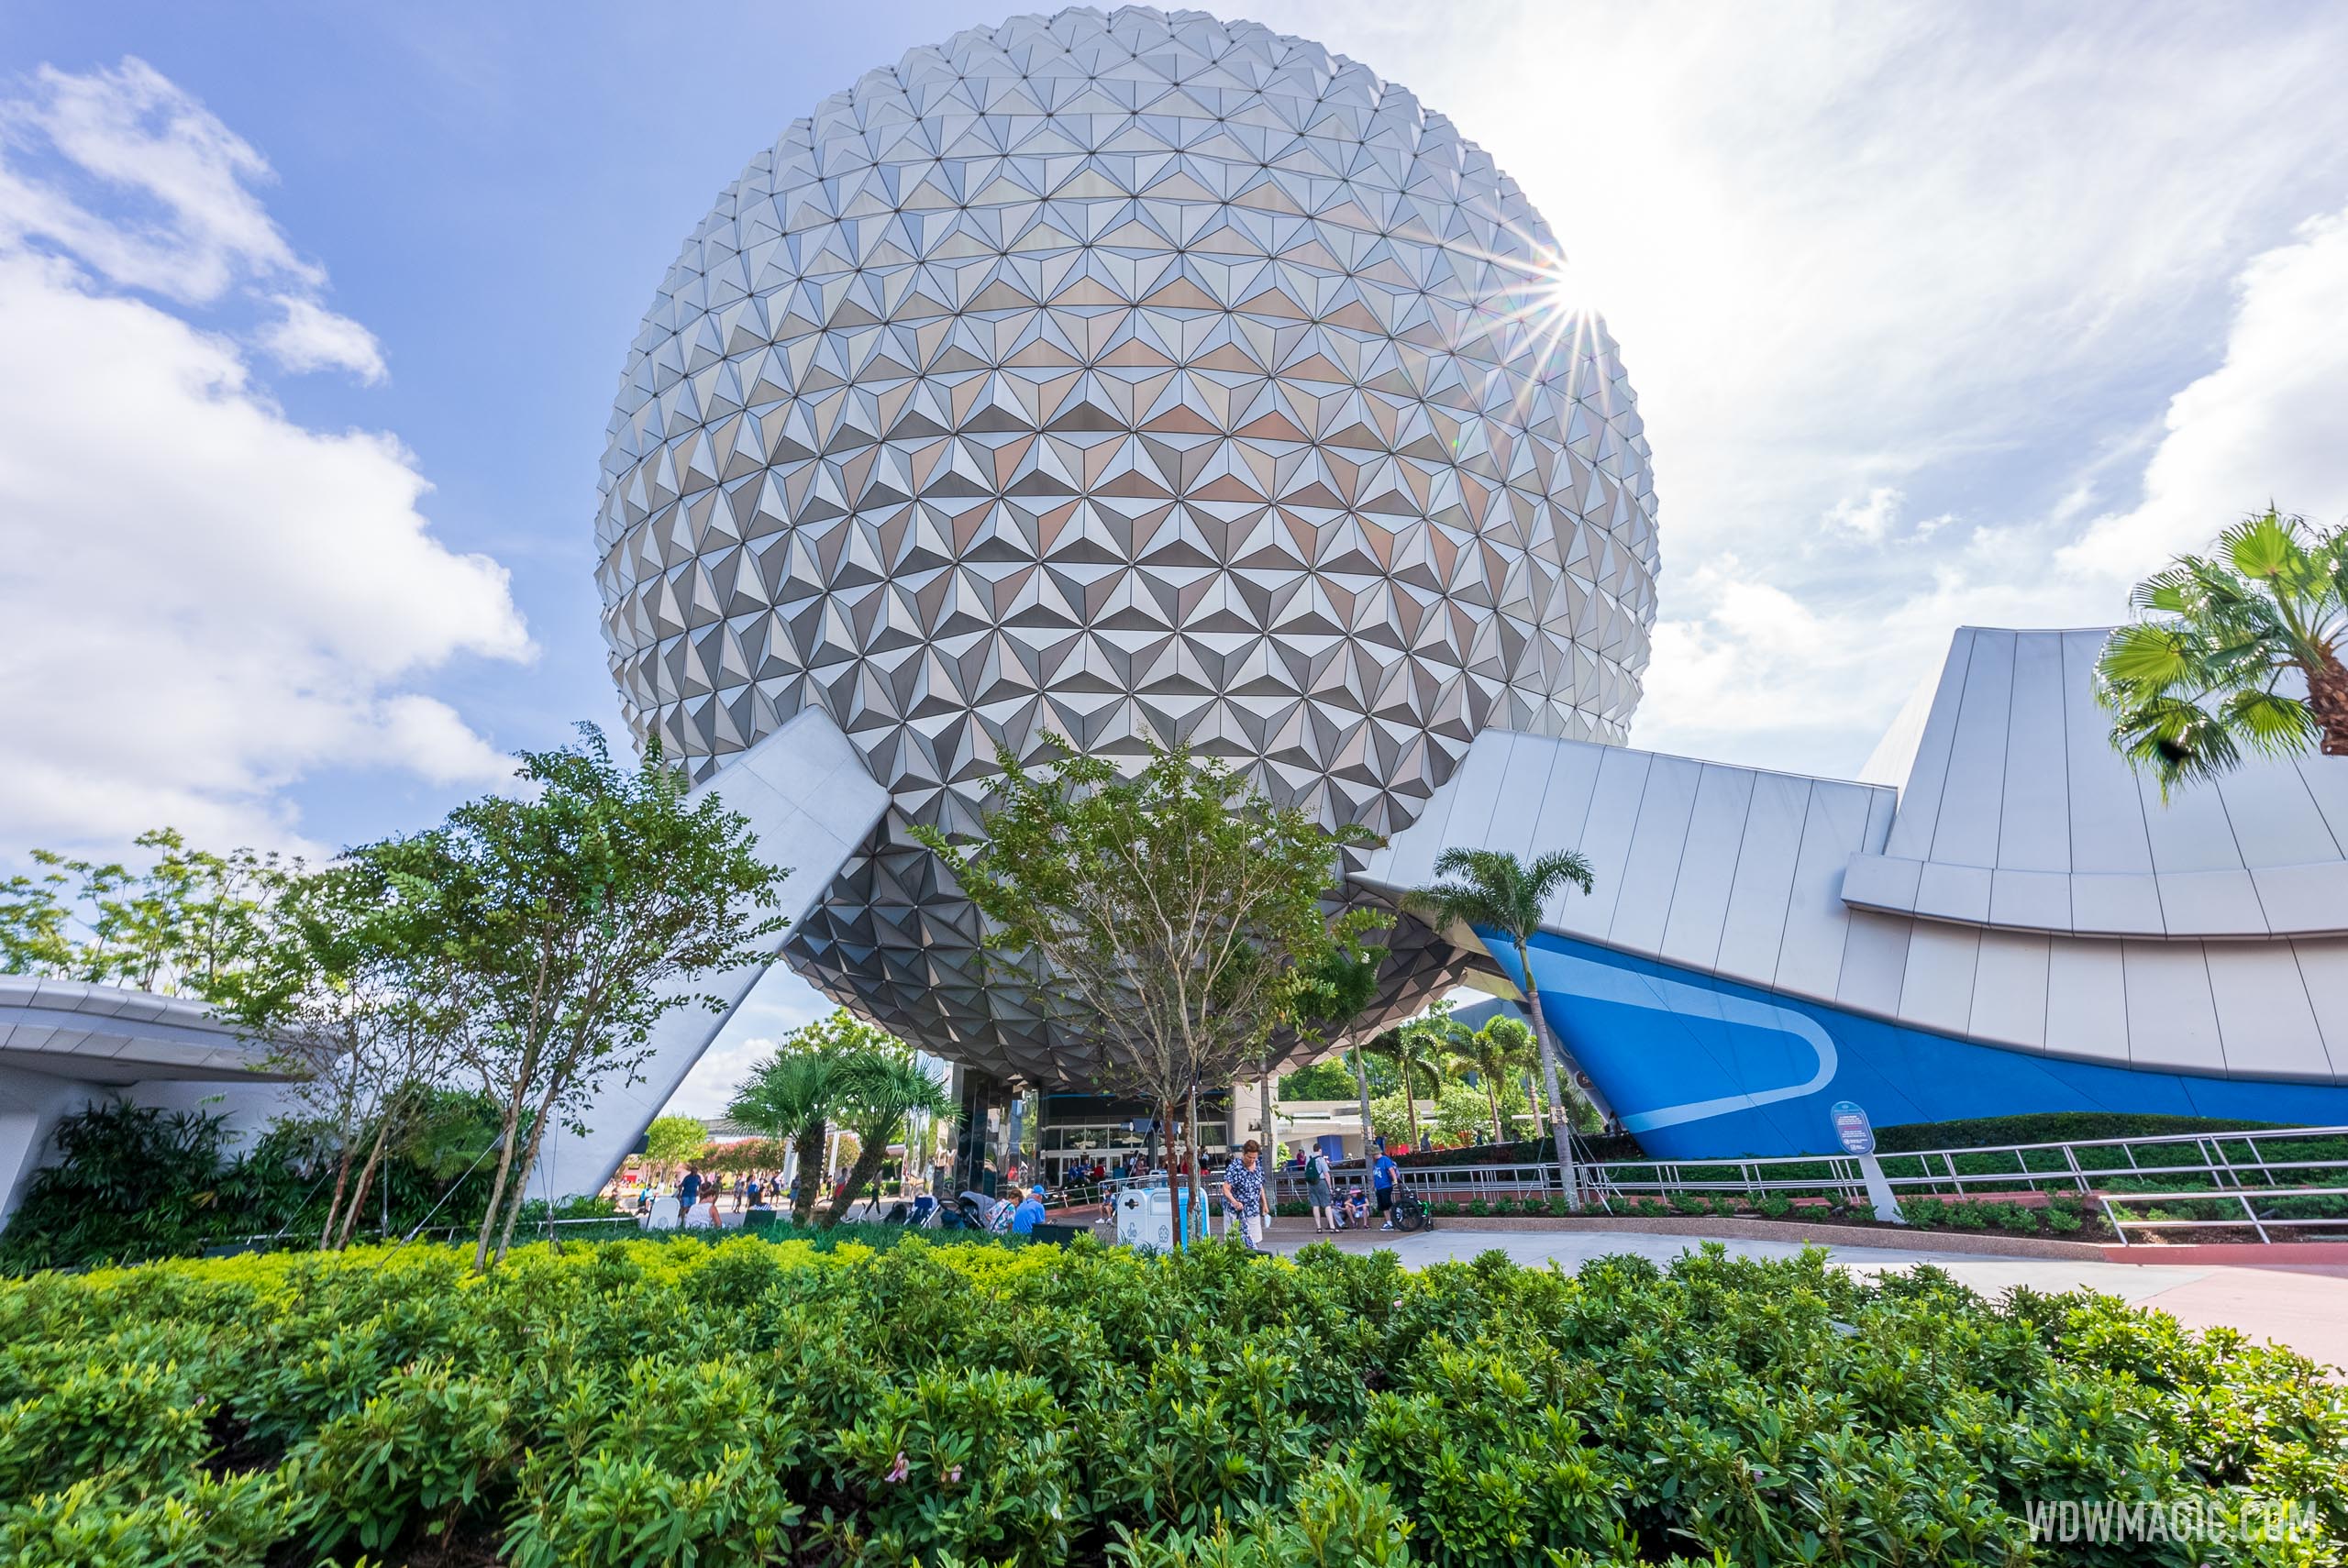 New landscaping beneath Spaceship Earth extends the green space of the new  EPCOT main entrance